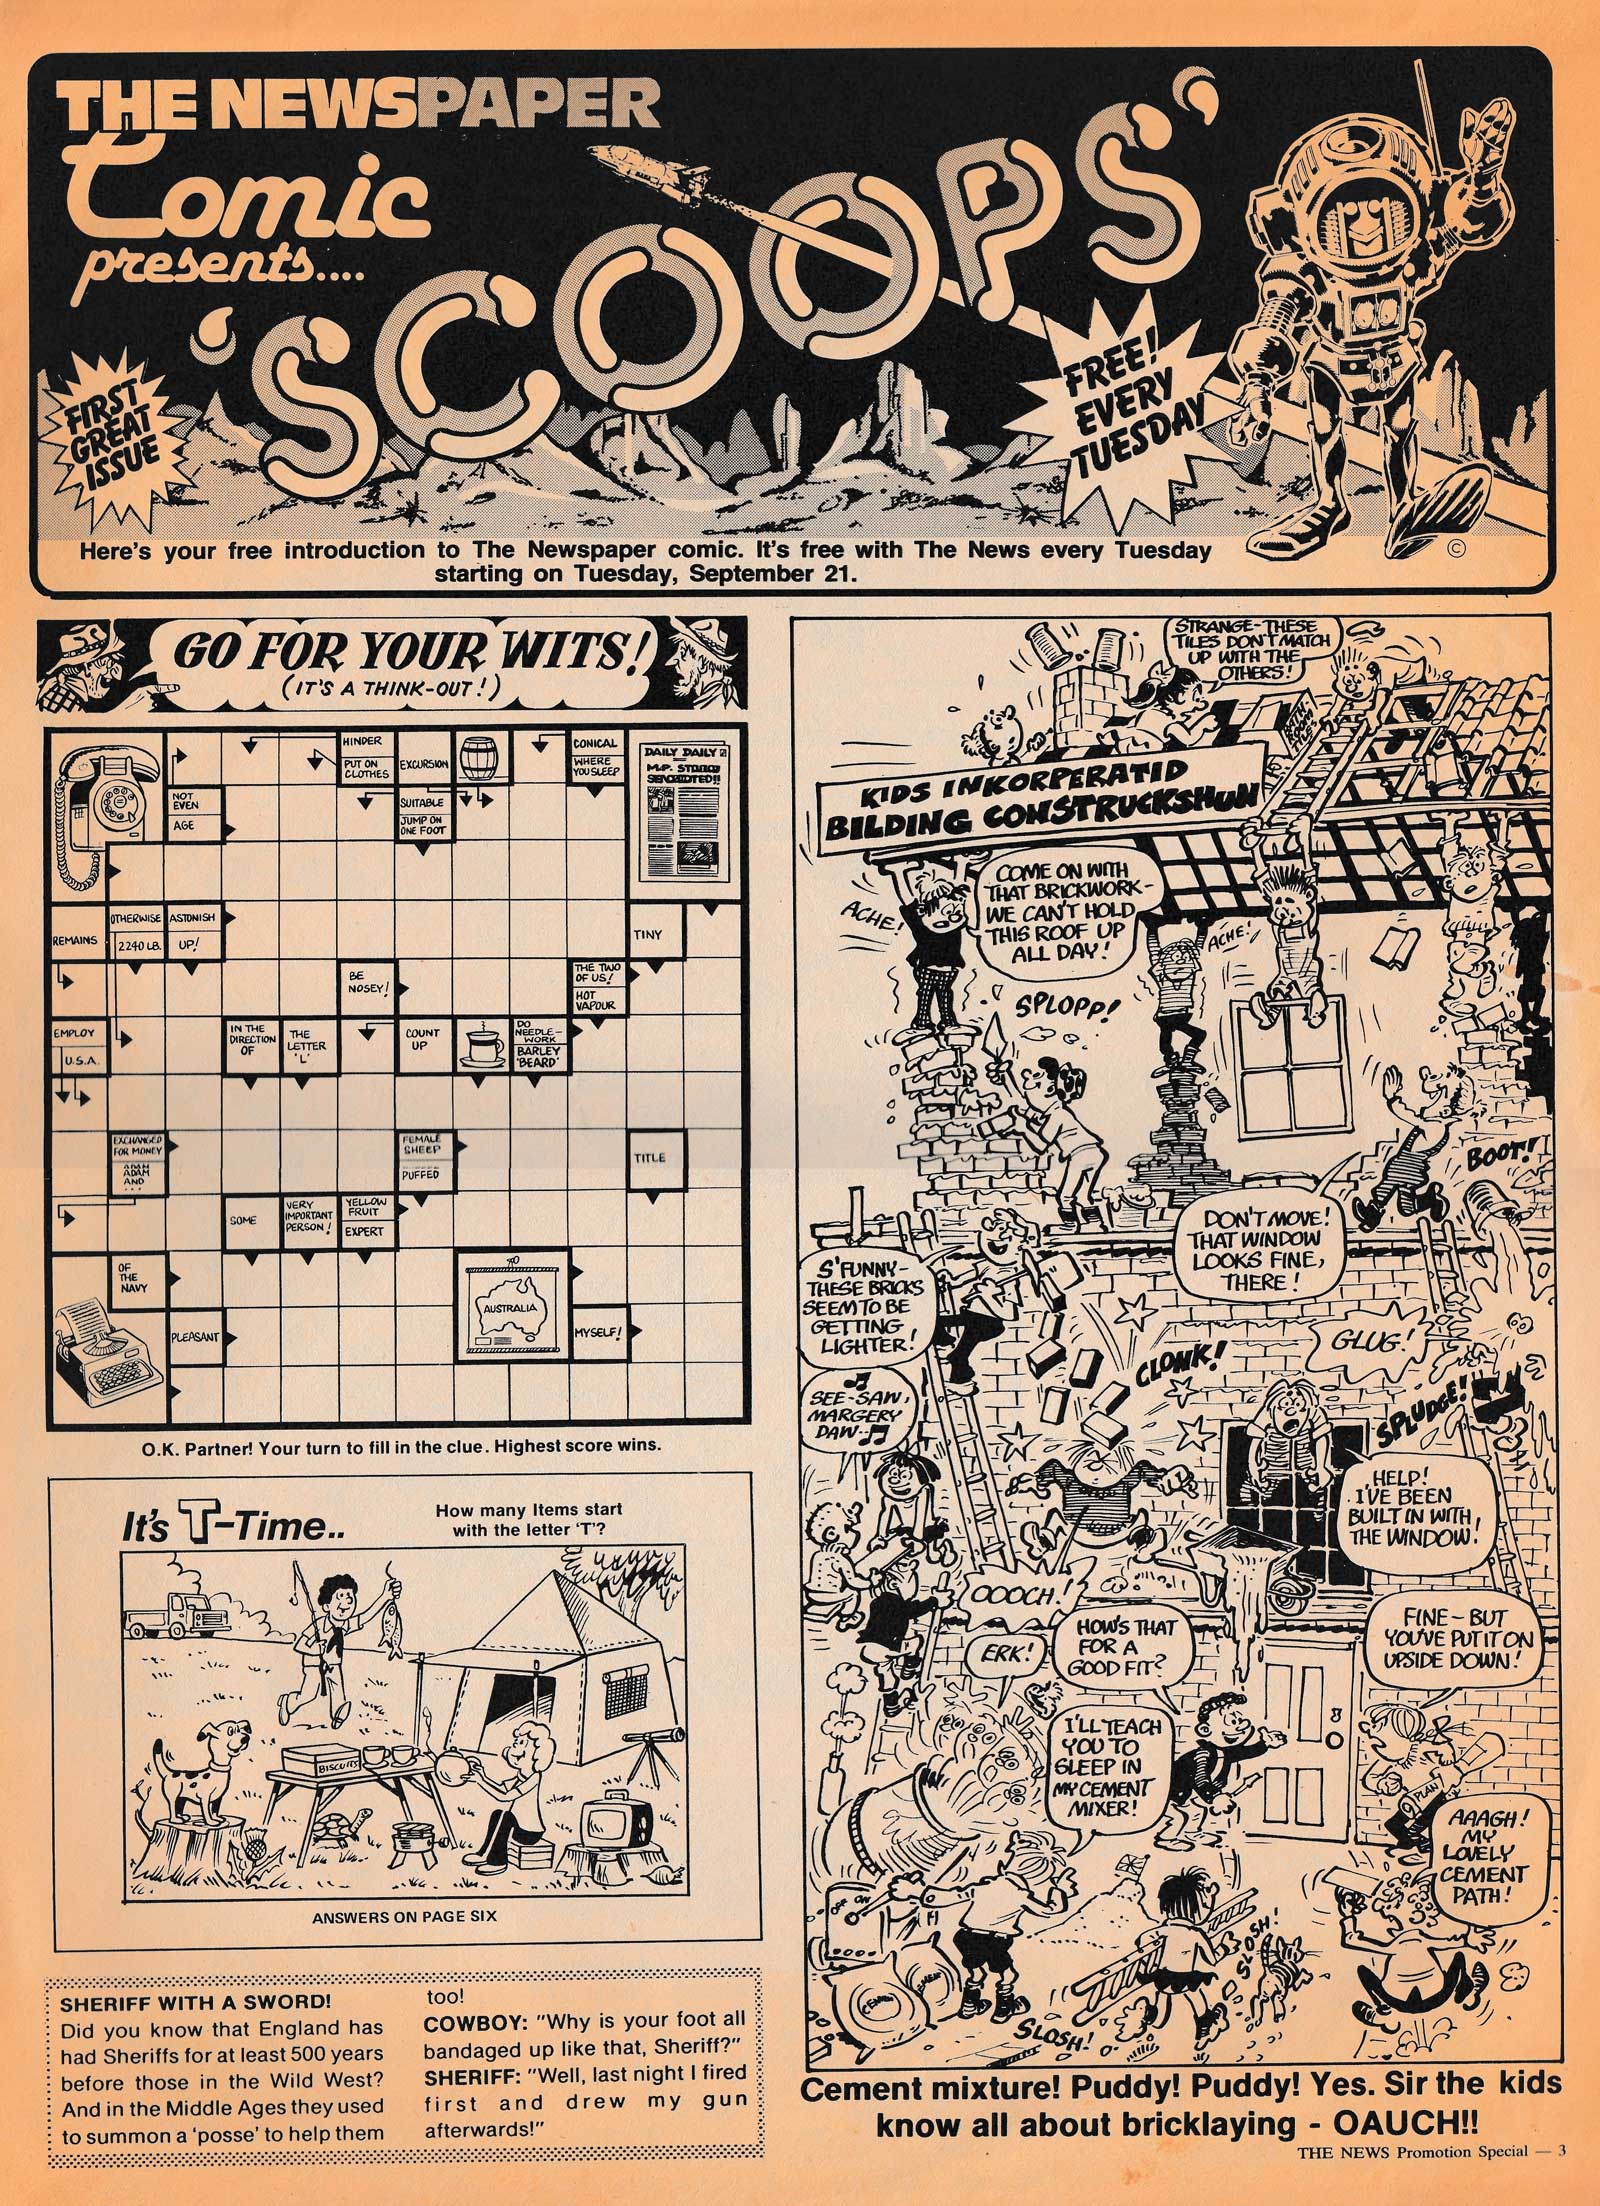 SCOOPS No. 1, cover dated 14th September 1982 featuring art by Ron Smith